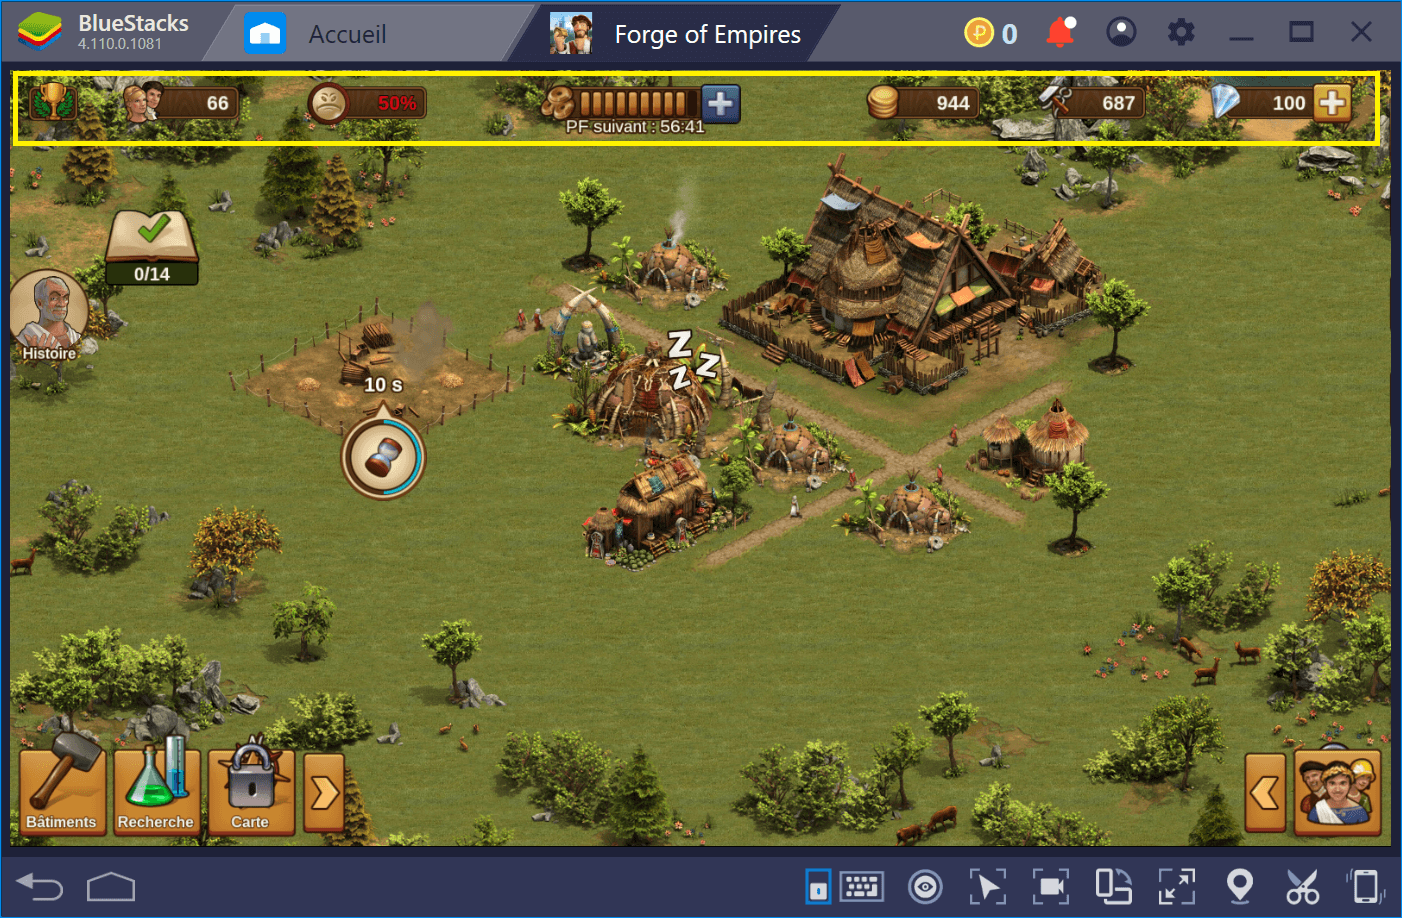 Guide BlueStacks pour Forge of Empires